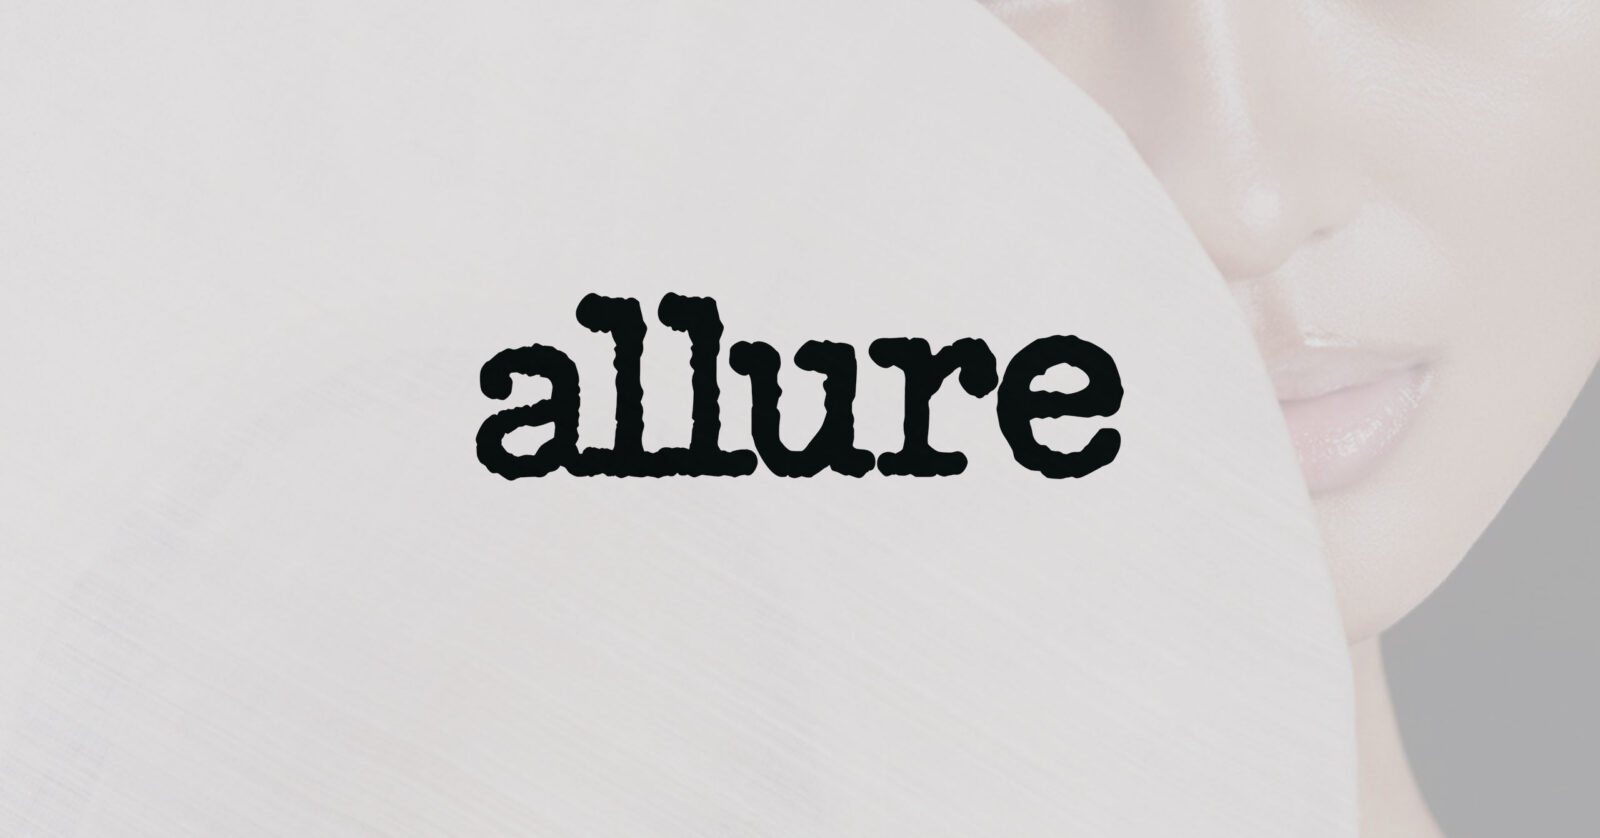 Allure Philippines will cover the Southeast Asian region and celebrate Filipino beauty, as well as showcase the best in fashion and women’s health.